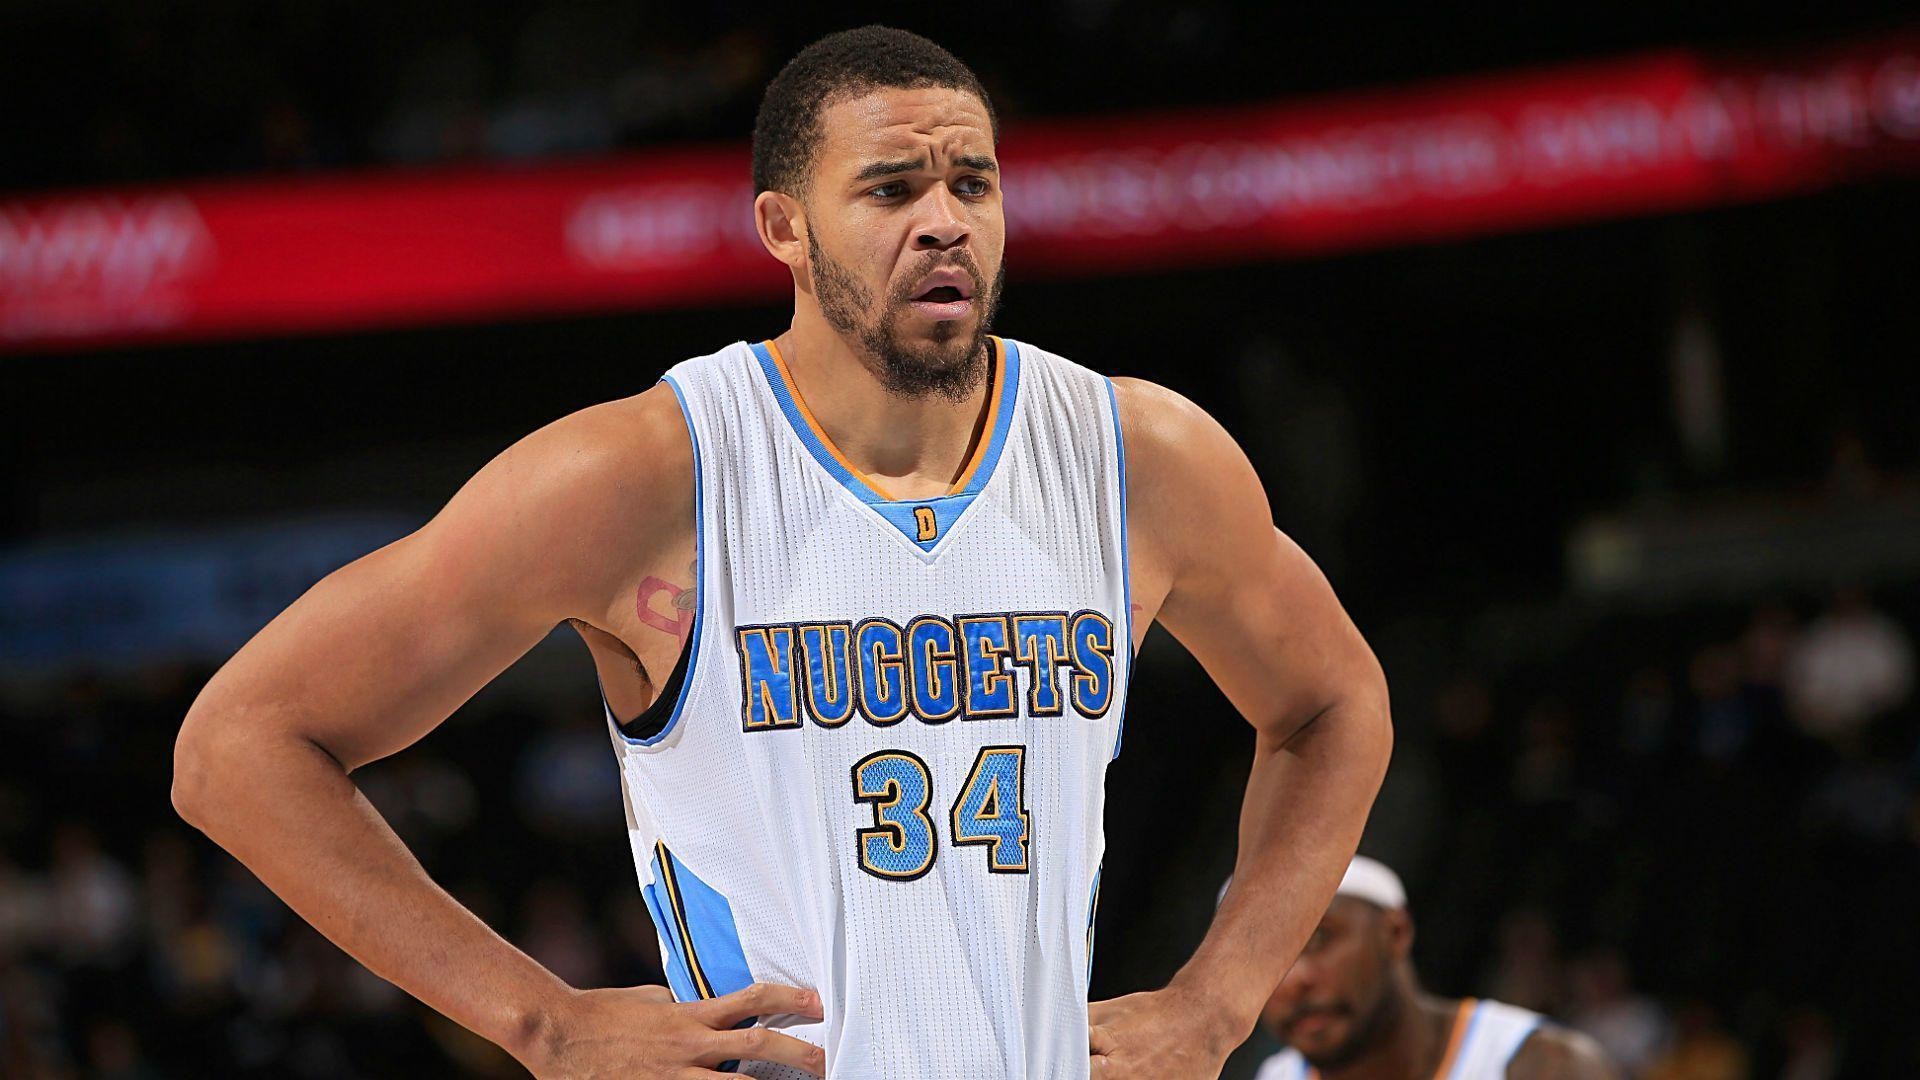 1920x1080 Images: JaVale McGee